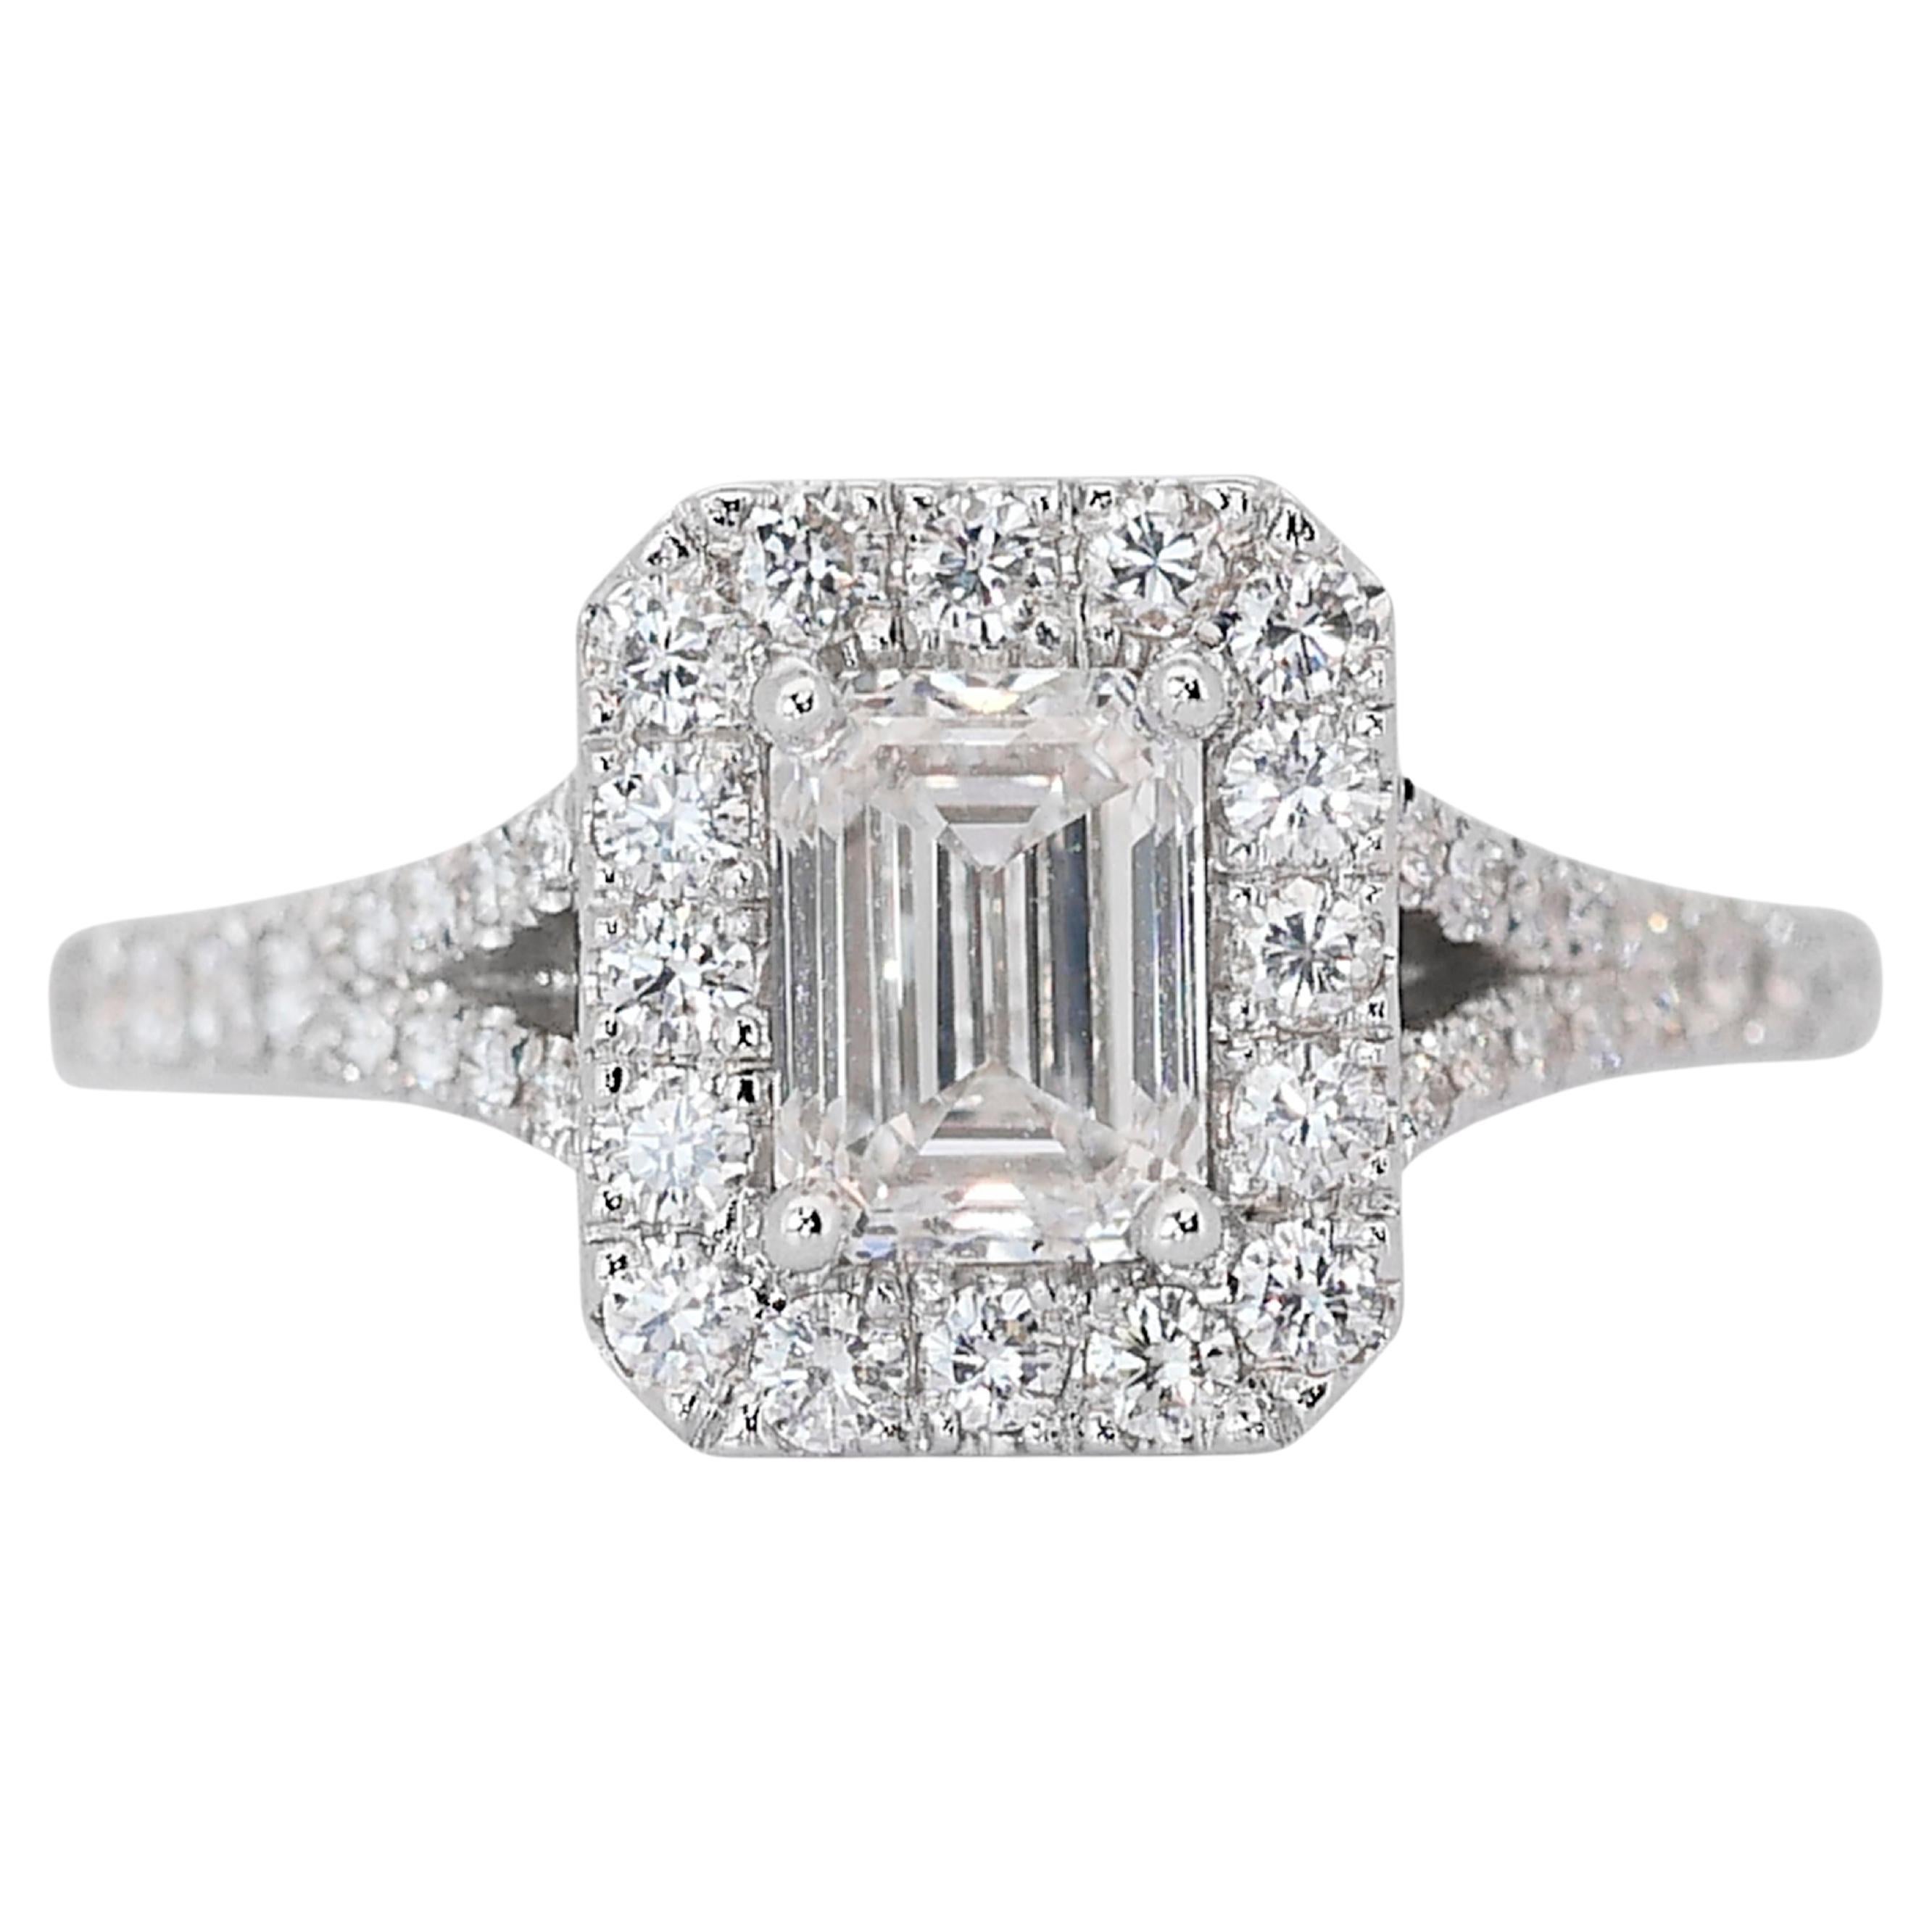 Captivating 1.15ct Emerald-Cut Diamond Halo Ring in 18k White Gold - GIA  For Sale